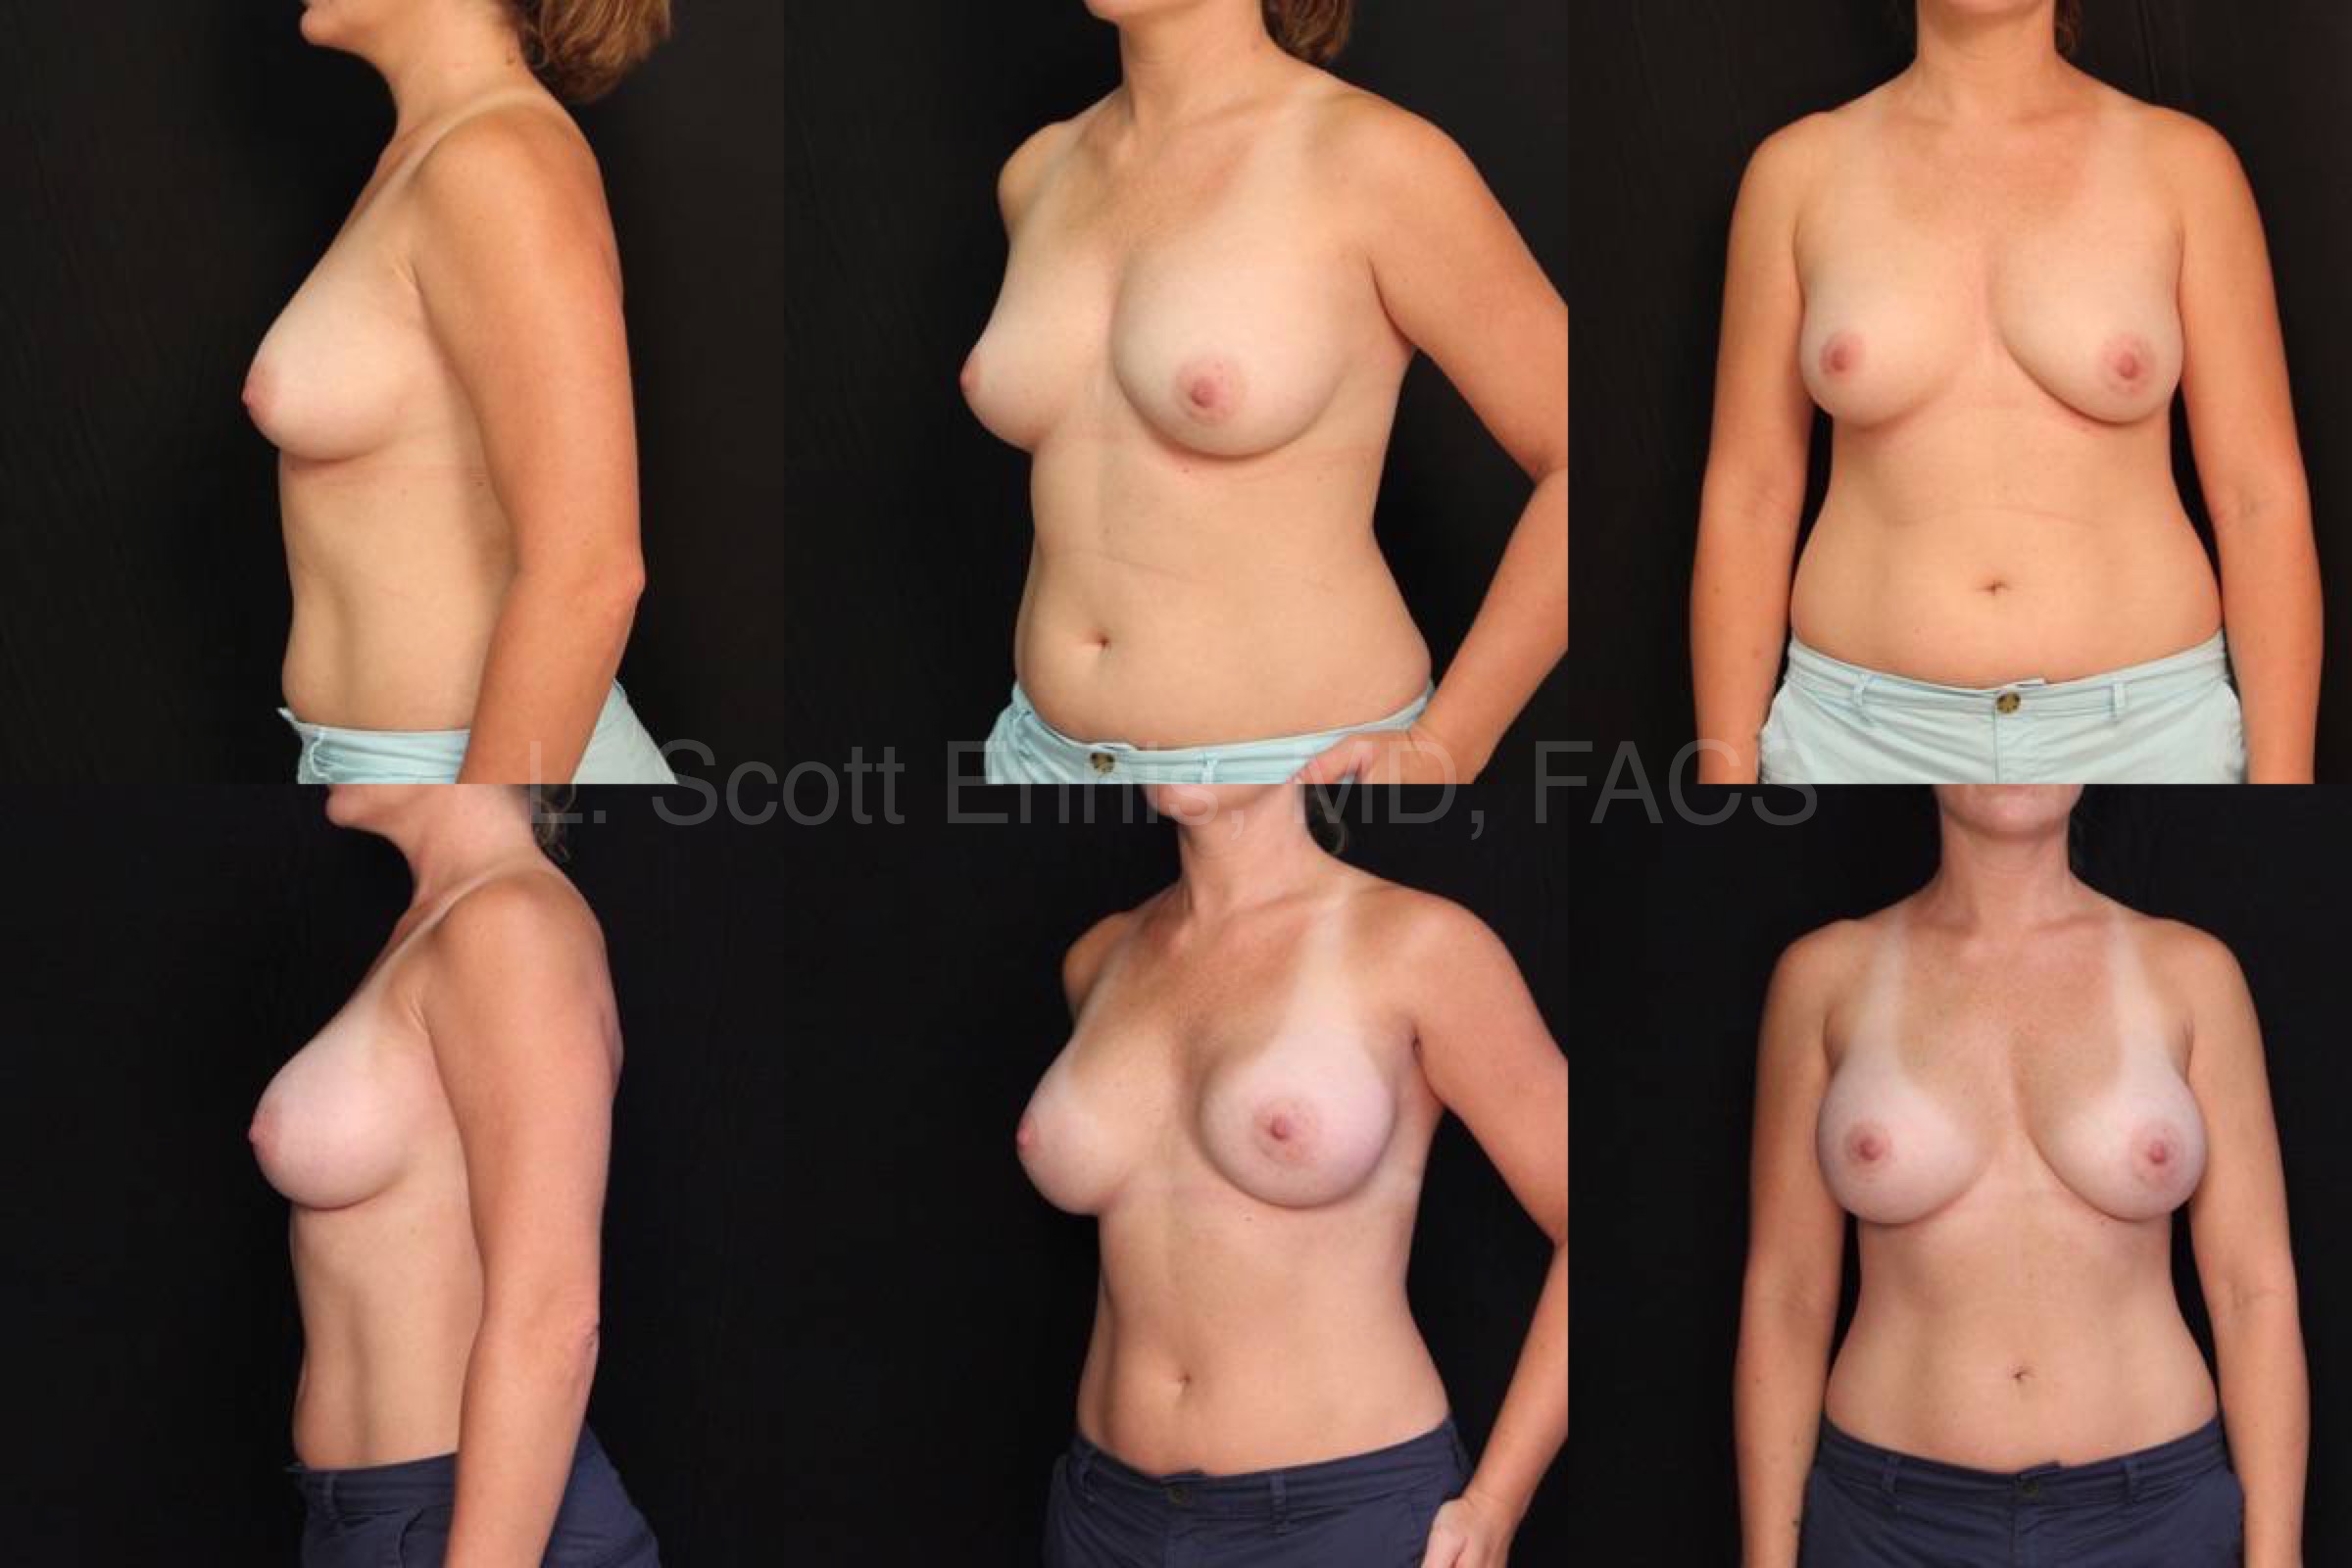 Endoscopic Transaxillary Breast Augmentation with Gel R400L350 Mod plus gel Before and After Ennis Plastic Surgery Palm Beach Boca Raton Destin Miami For Lauderdale Florida